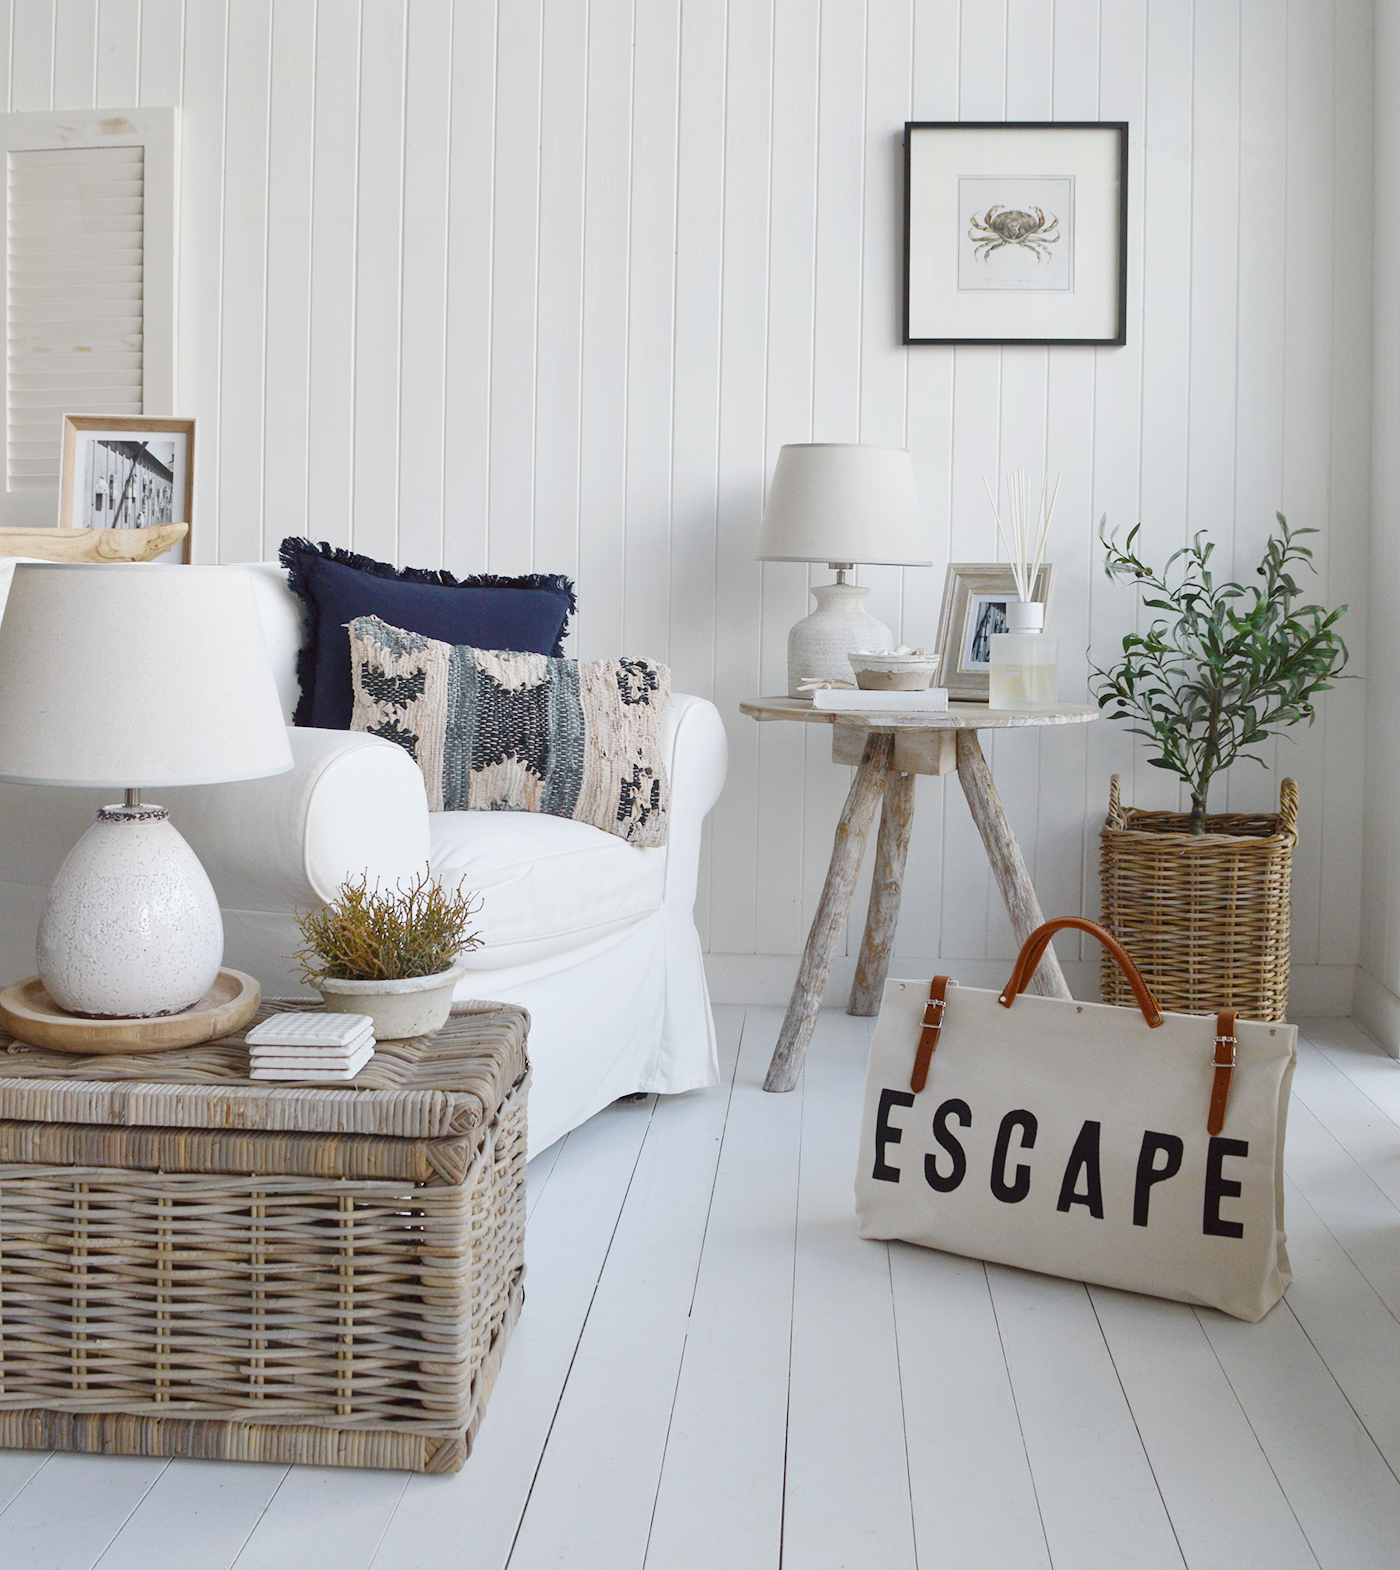 The Hamptions coastal home interior, shown here with coastal furniture and cushions for warmth